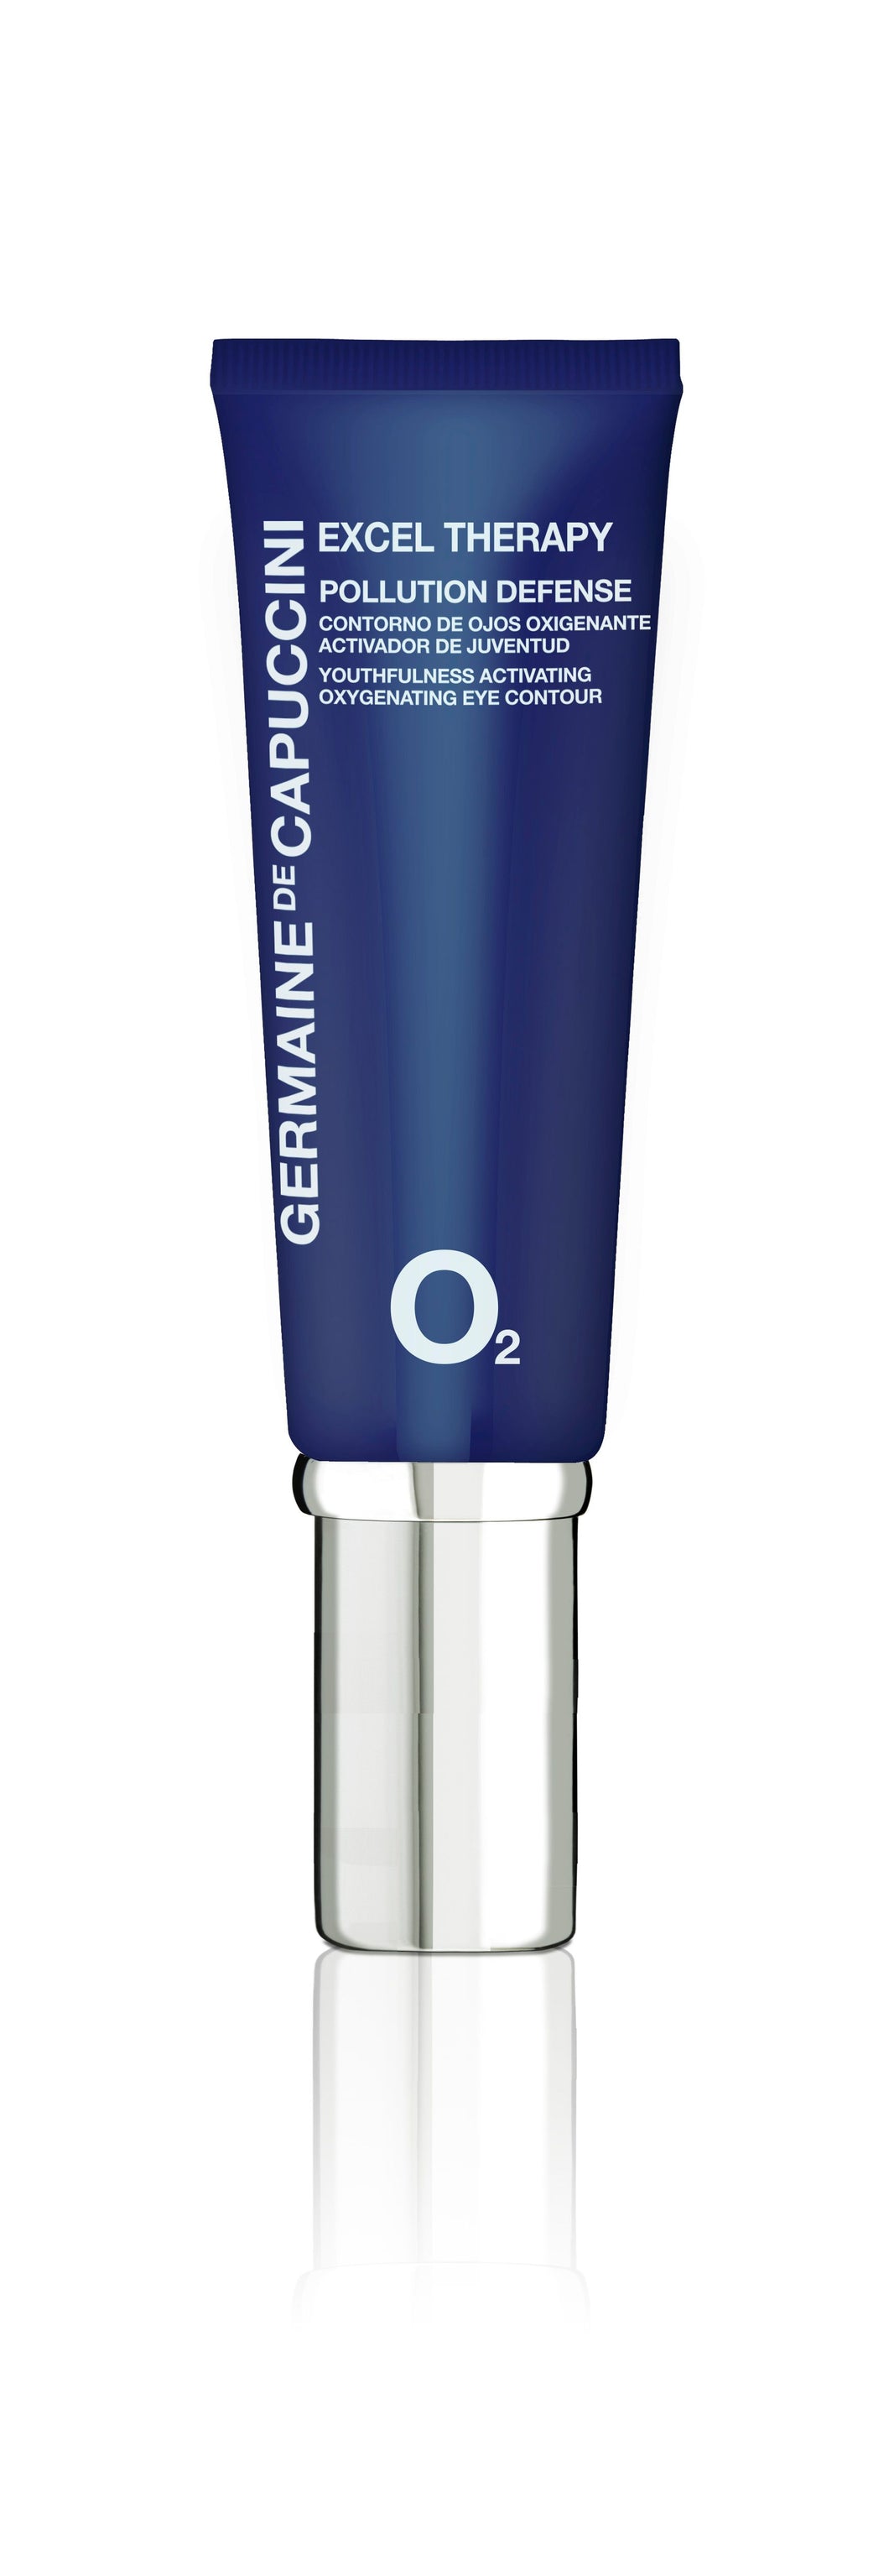 Excel Therapy O2 - Youthfulness Activating Oxygenating Eye Contour